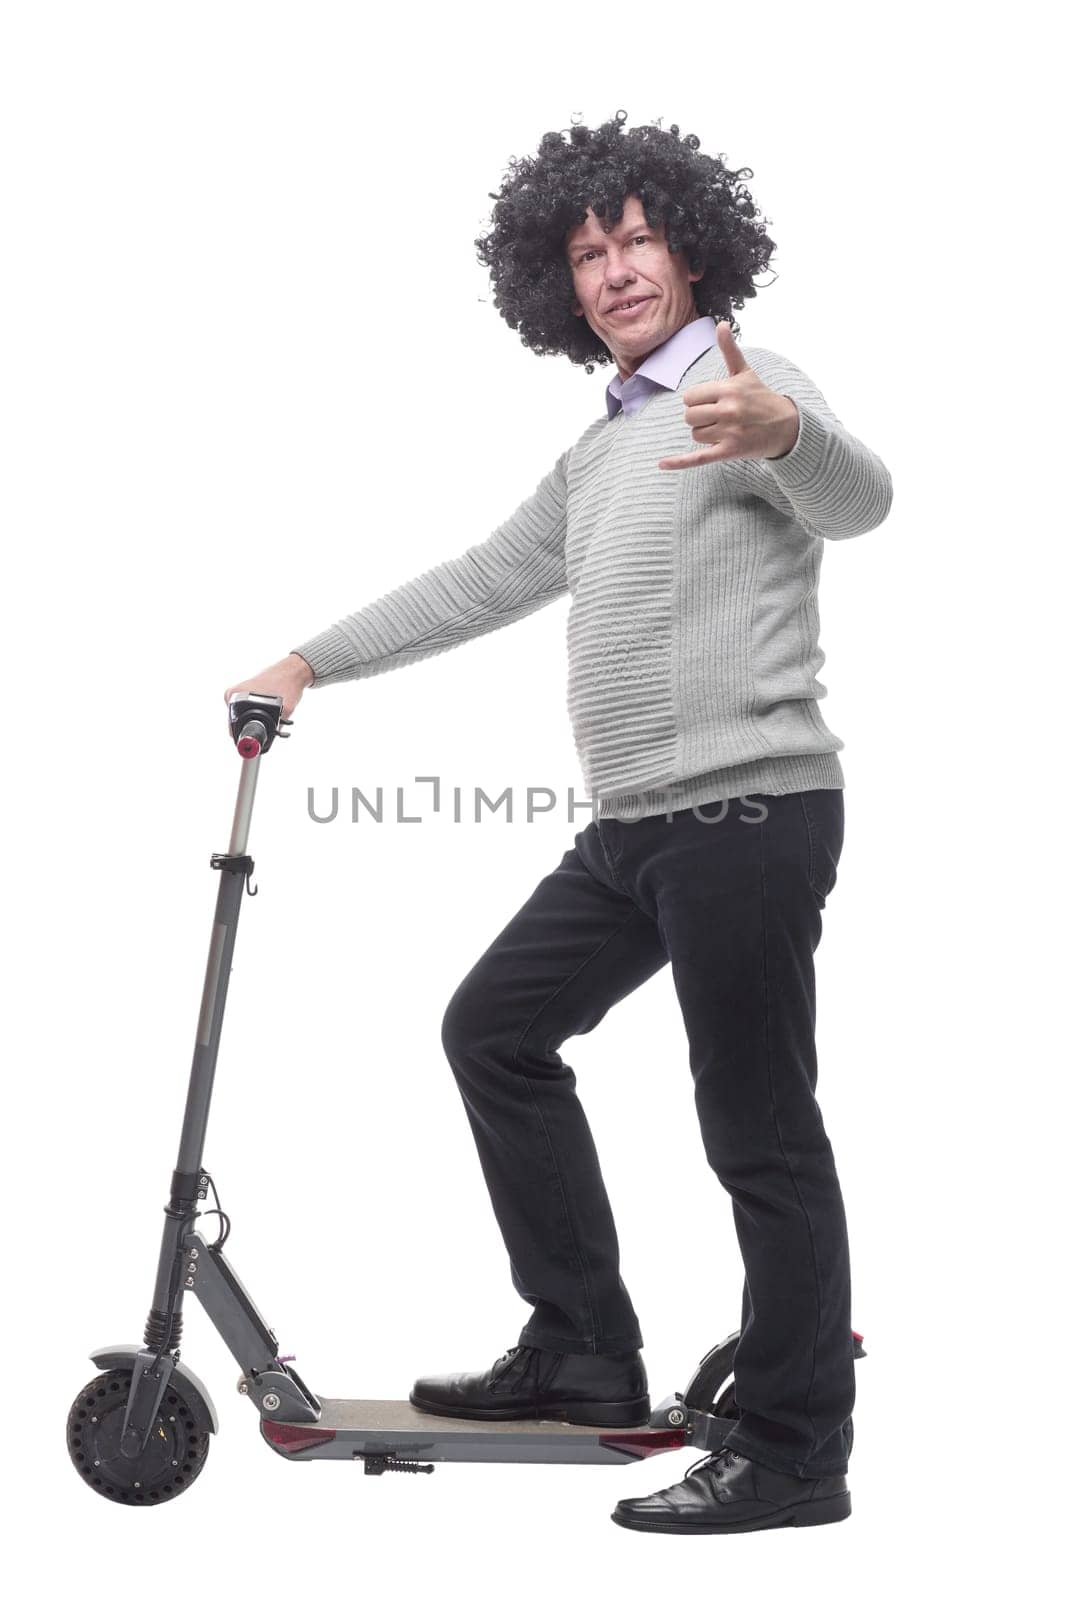 in full growth. cheerful man with an electric scooter. isolated on a white background.